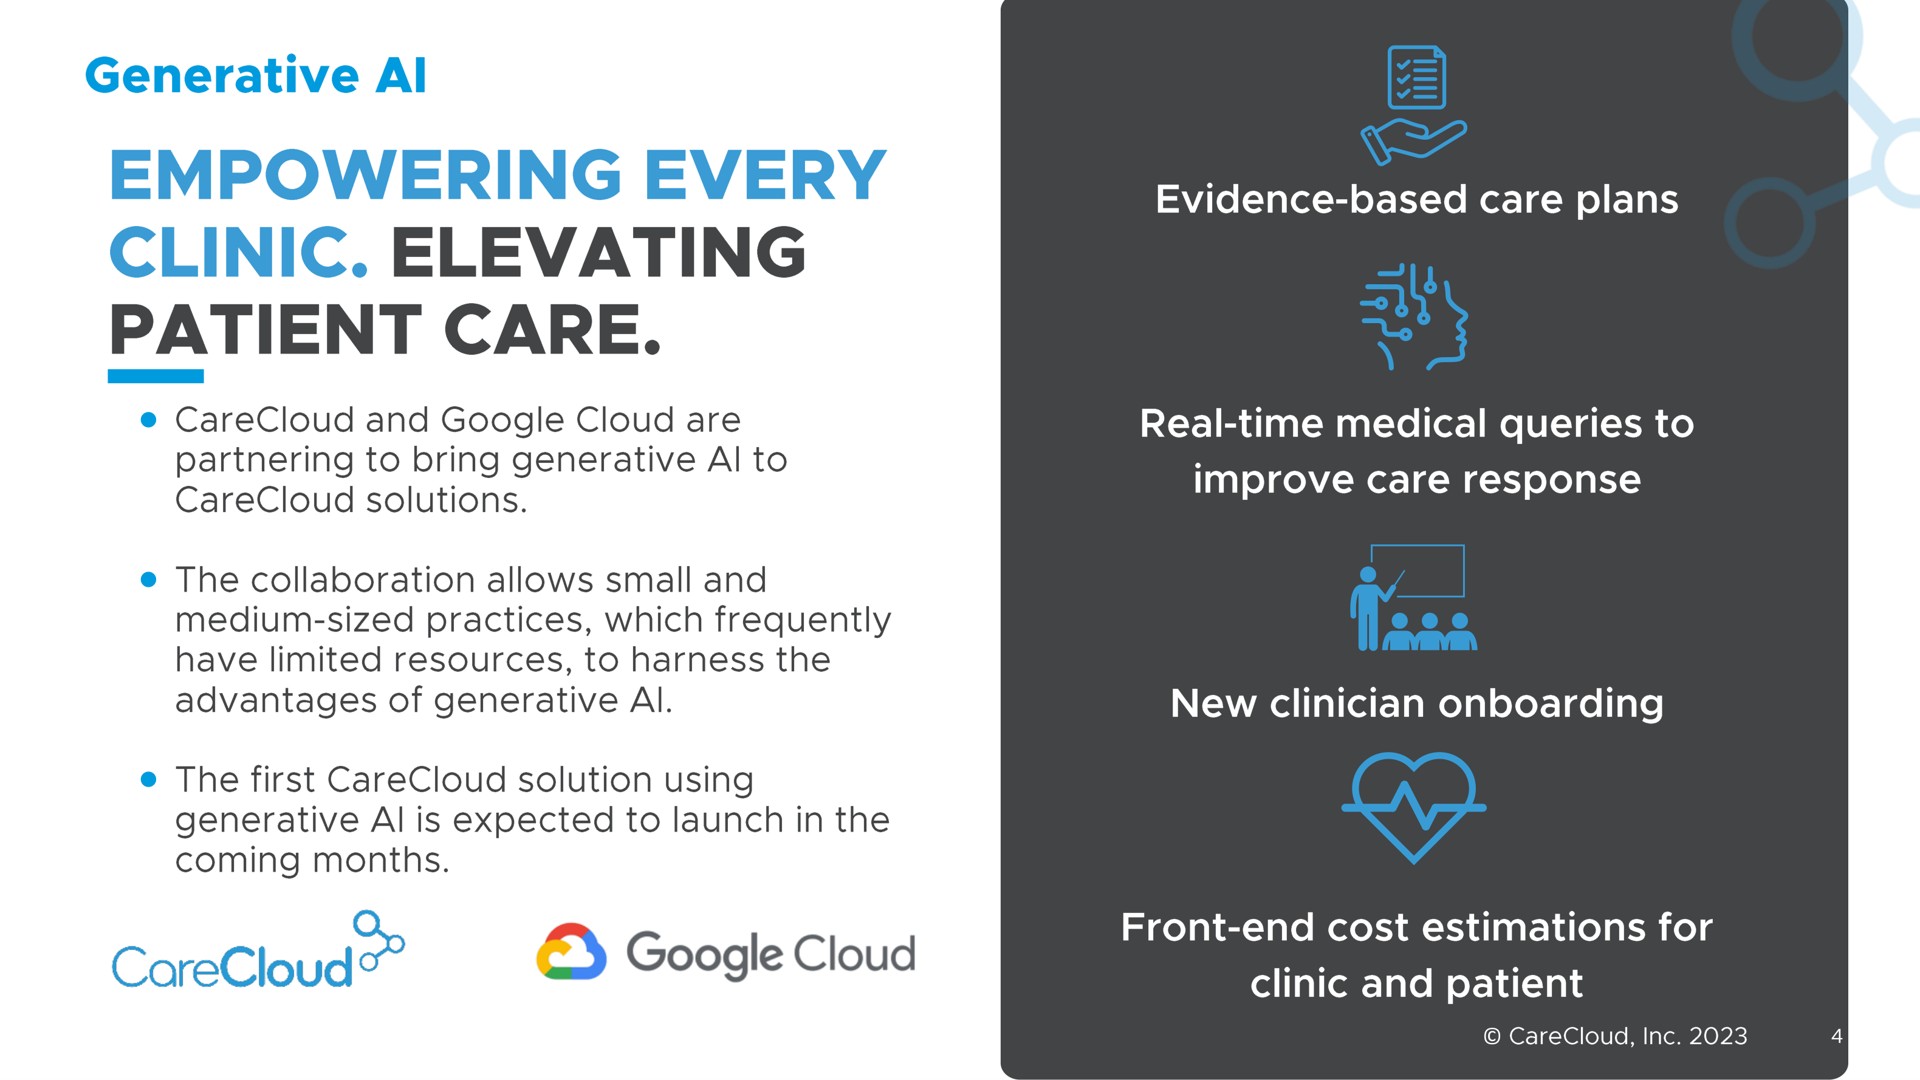 generative empowering every clinic elevating patient care cloud evidence based care plans real time medical queries to improve care response new clinician clinic and patient | CareCloud